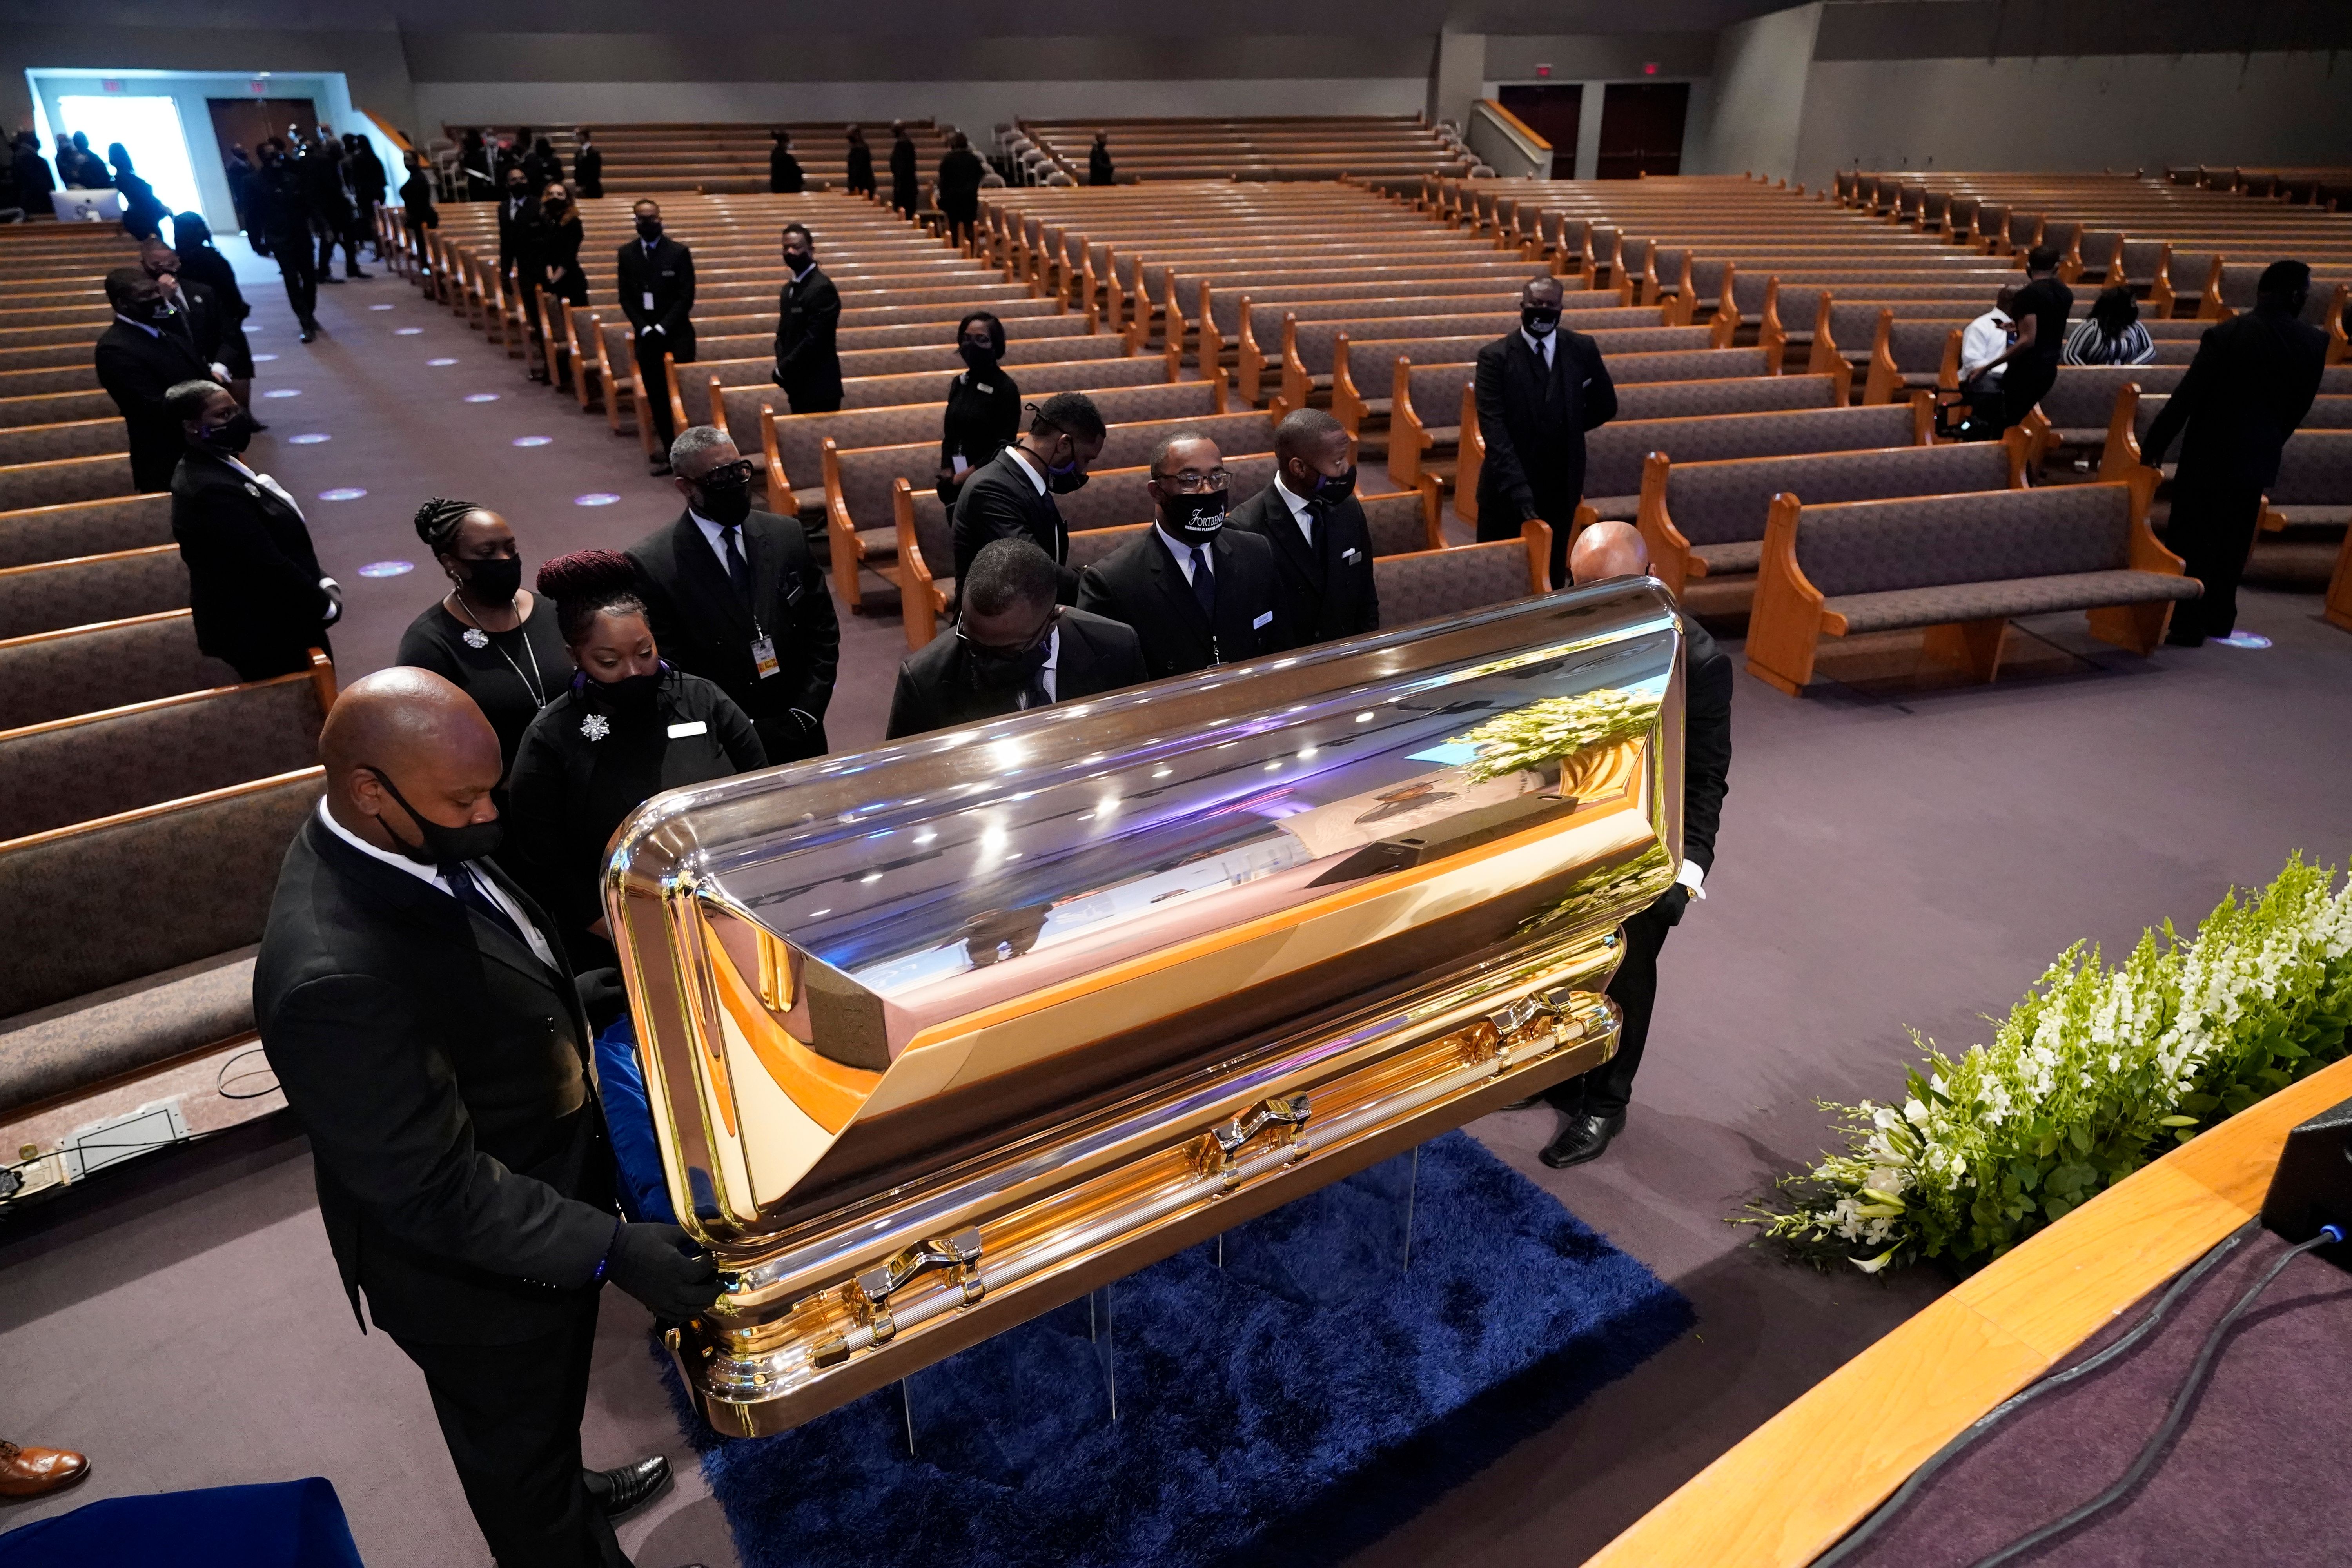 The casket of George Floyd is placed in the chapel during a funeral service on June 9, 2020, at The Fountain of Praise church in Houston, Texas. (DAVID J. PHILLIP/POOL/AFP via Getty Images)